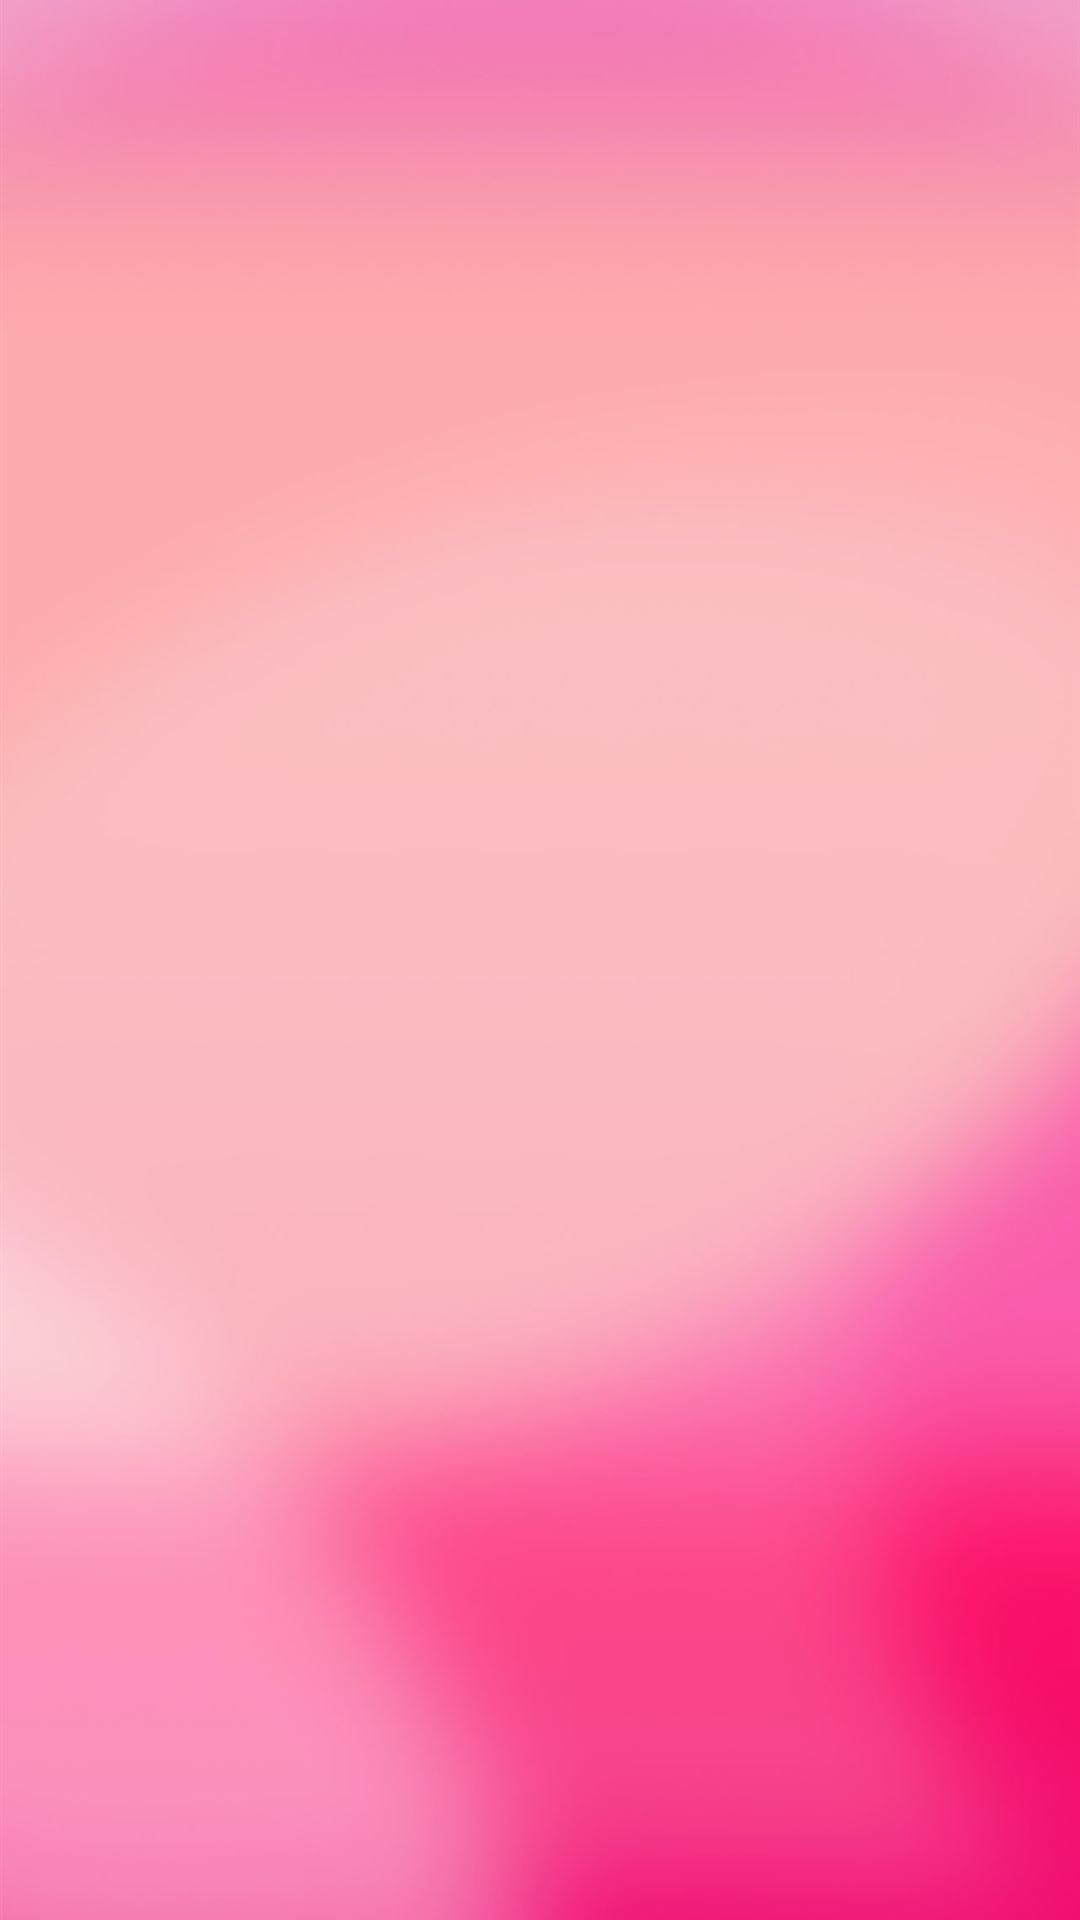 93 Wallpaper Pink Polos Iphone - MyWeb